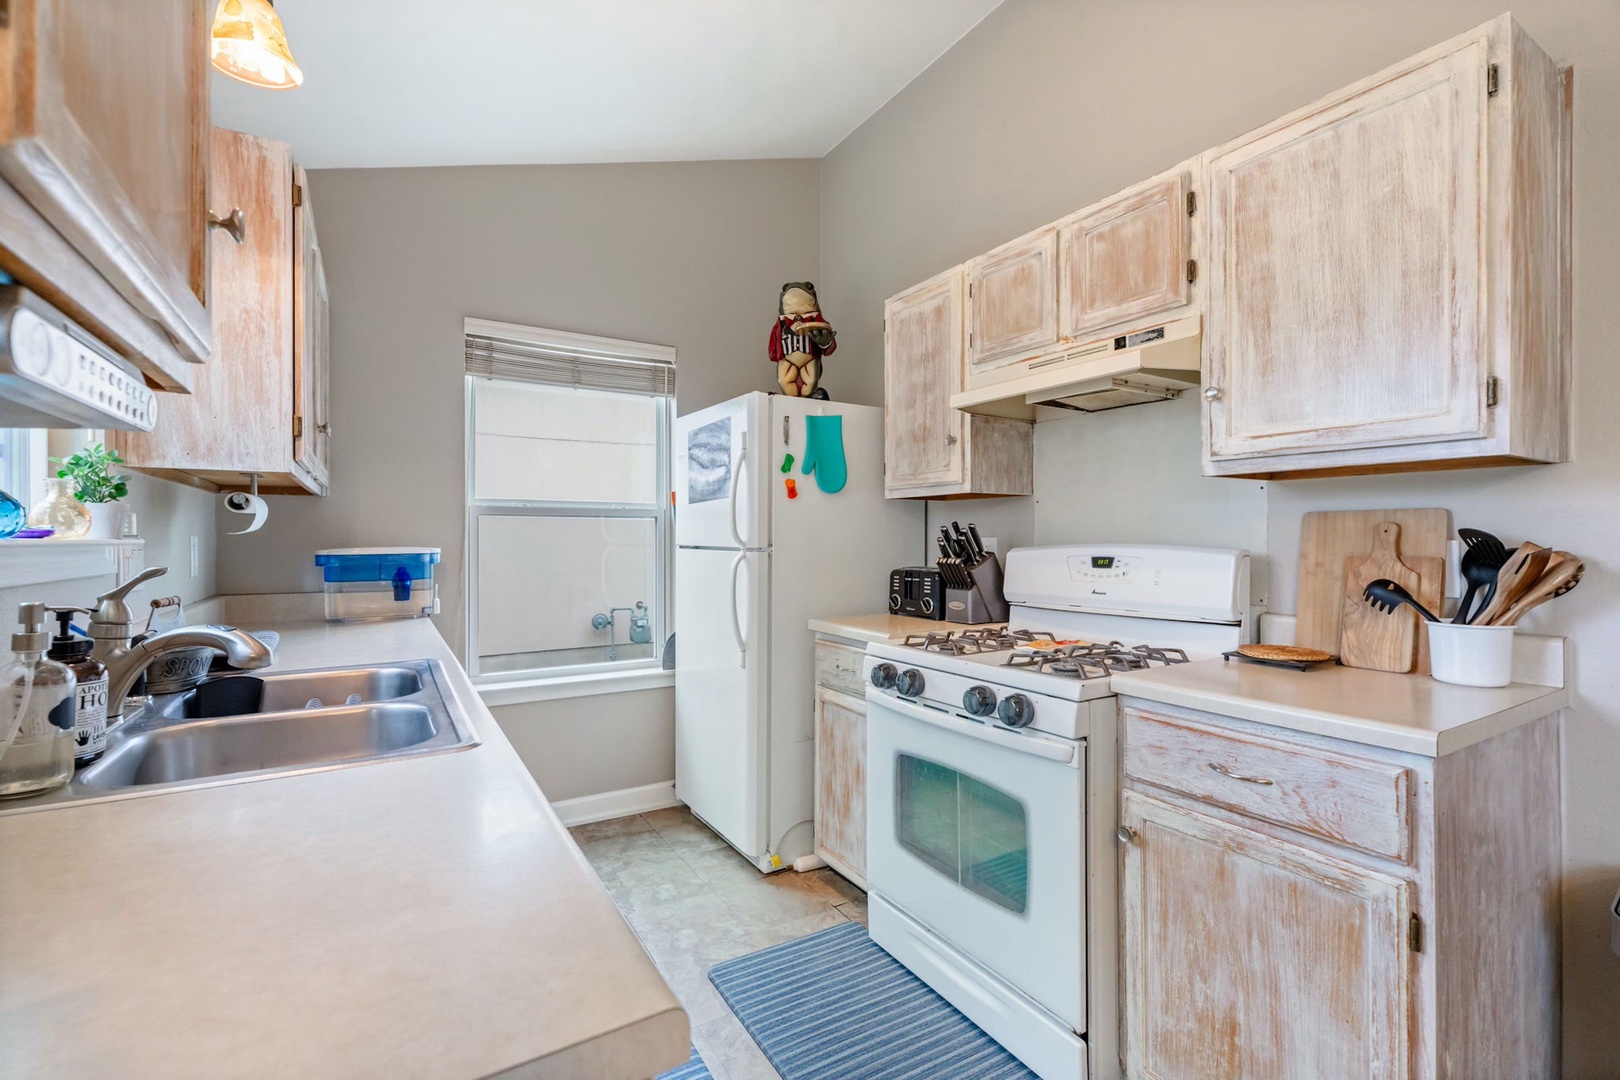 The tranquil kitchen offers ample space & all the comforts of home